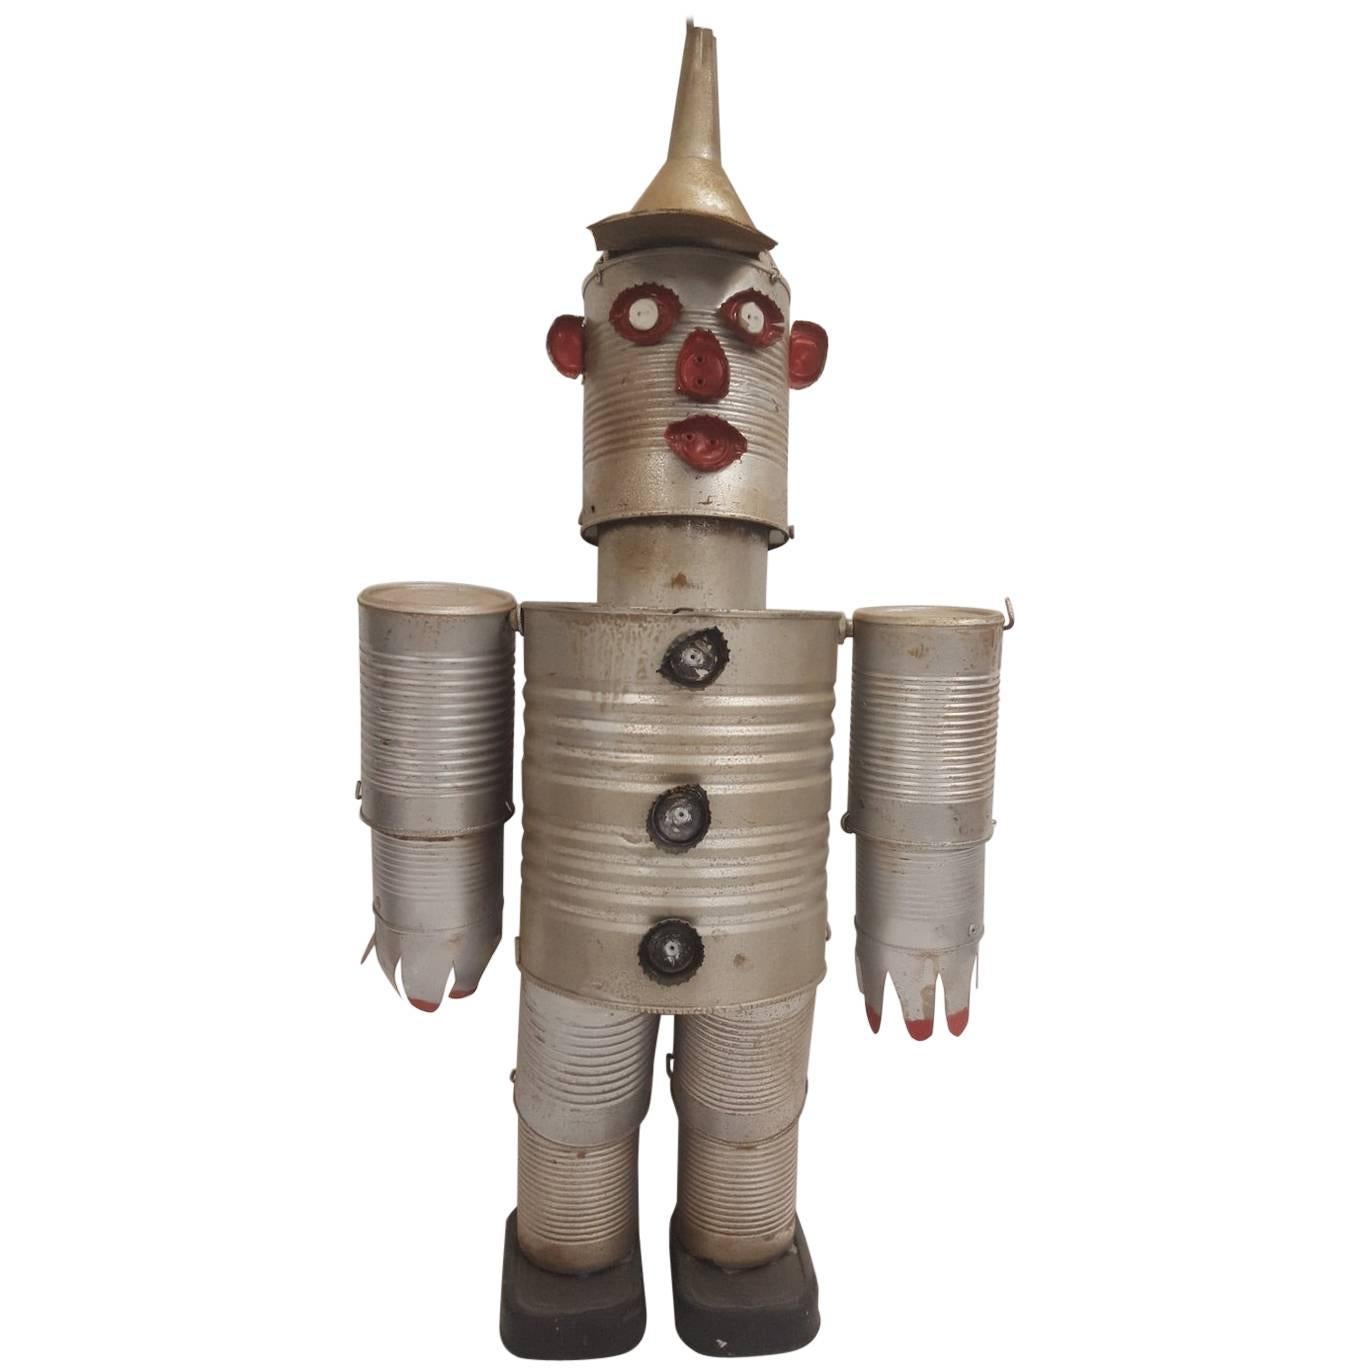 Mid-20th Century Folk Art Figure of the Tin Man from the Wizard of Oz